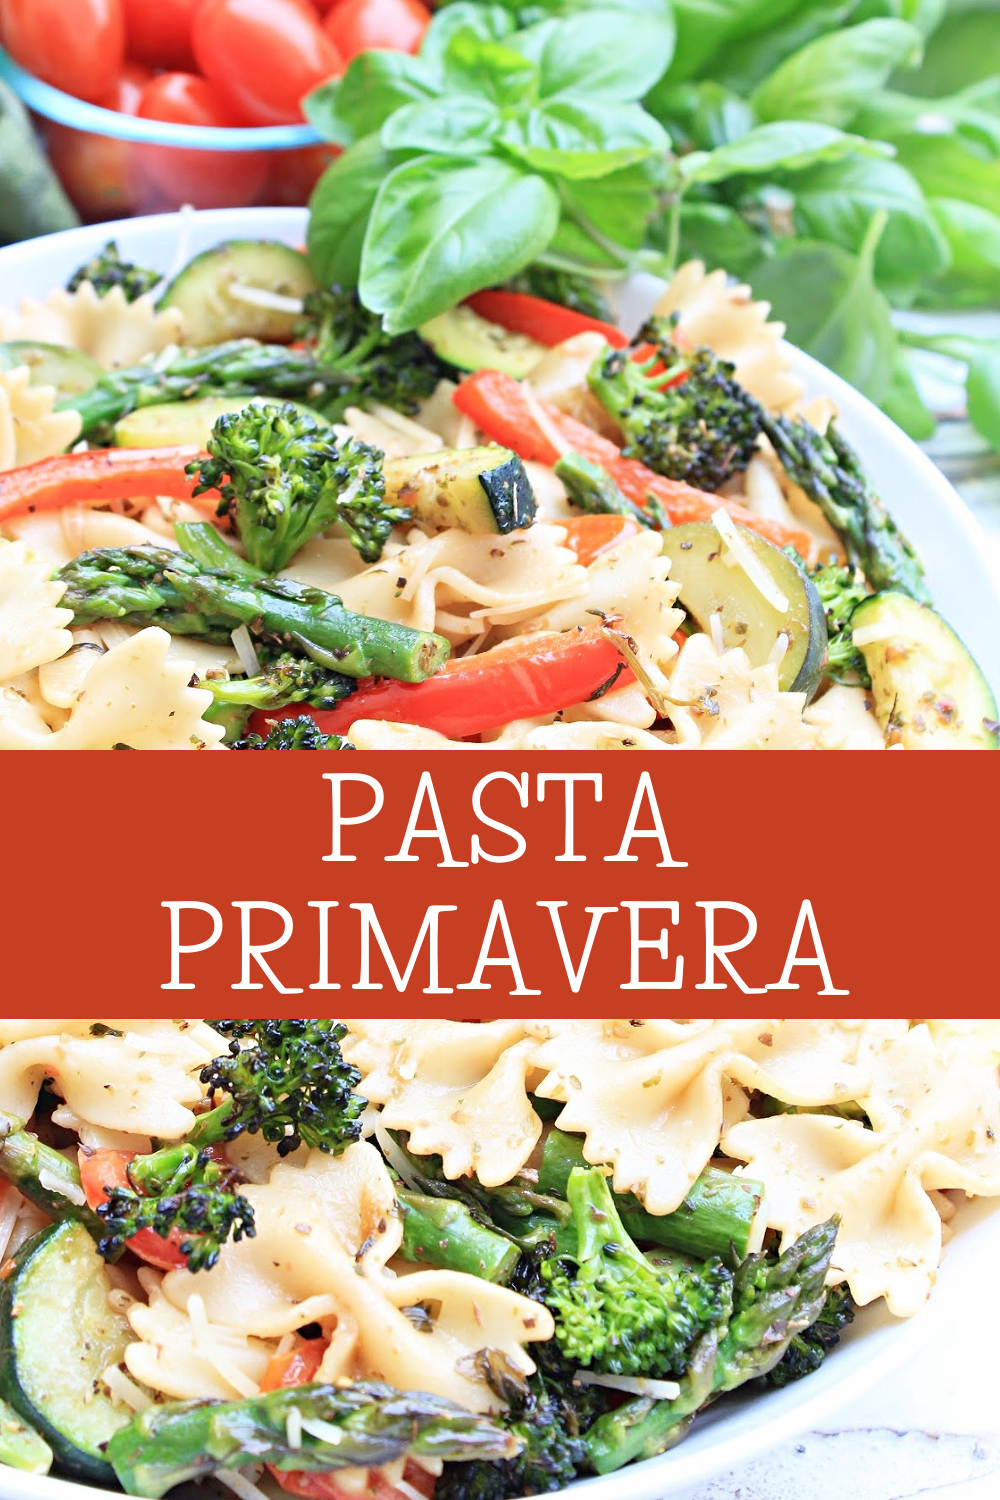 Pasta Primavera ~ A simple and flavorful pasta dish packed with fresh vegetables of the season! No cream sauce! via @thiswifecooks